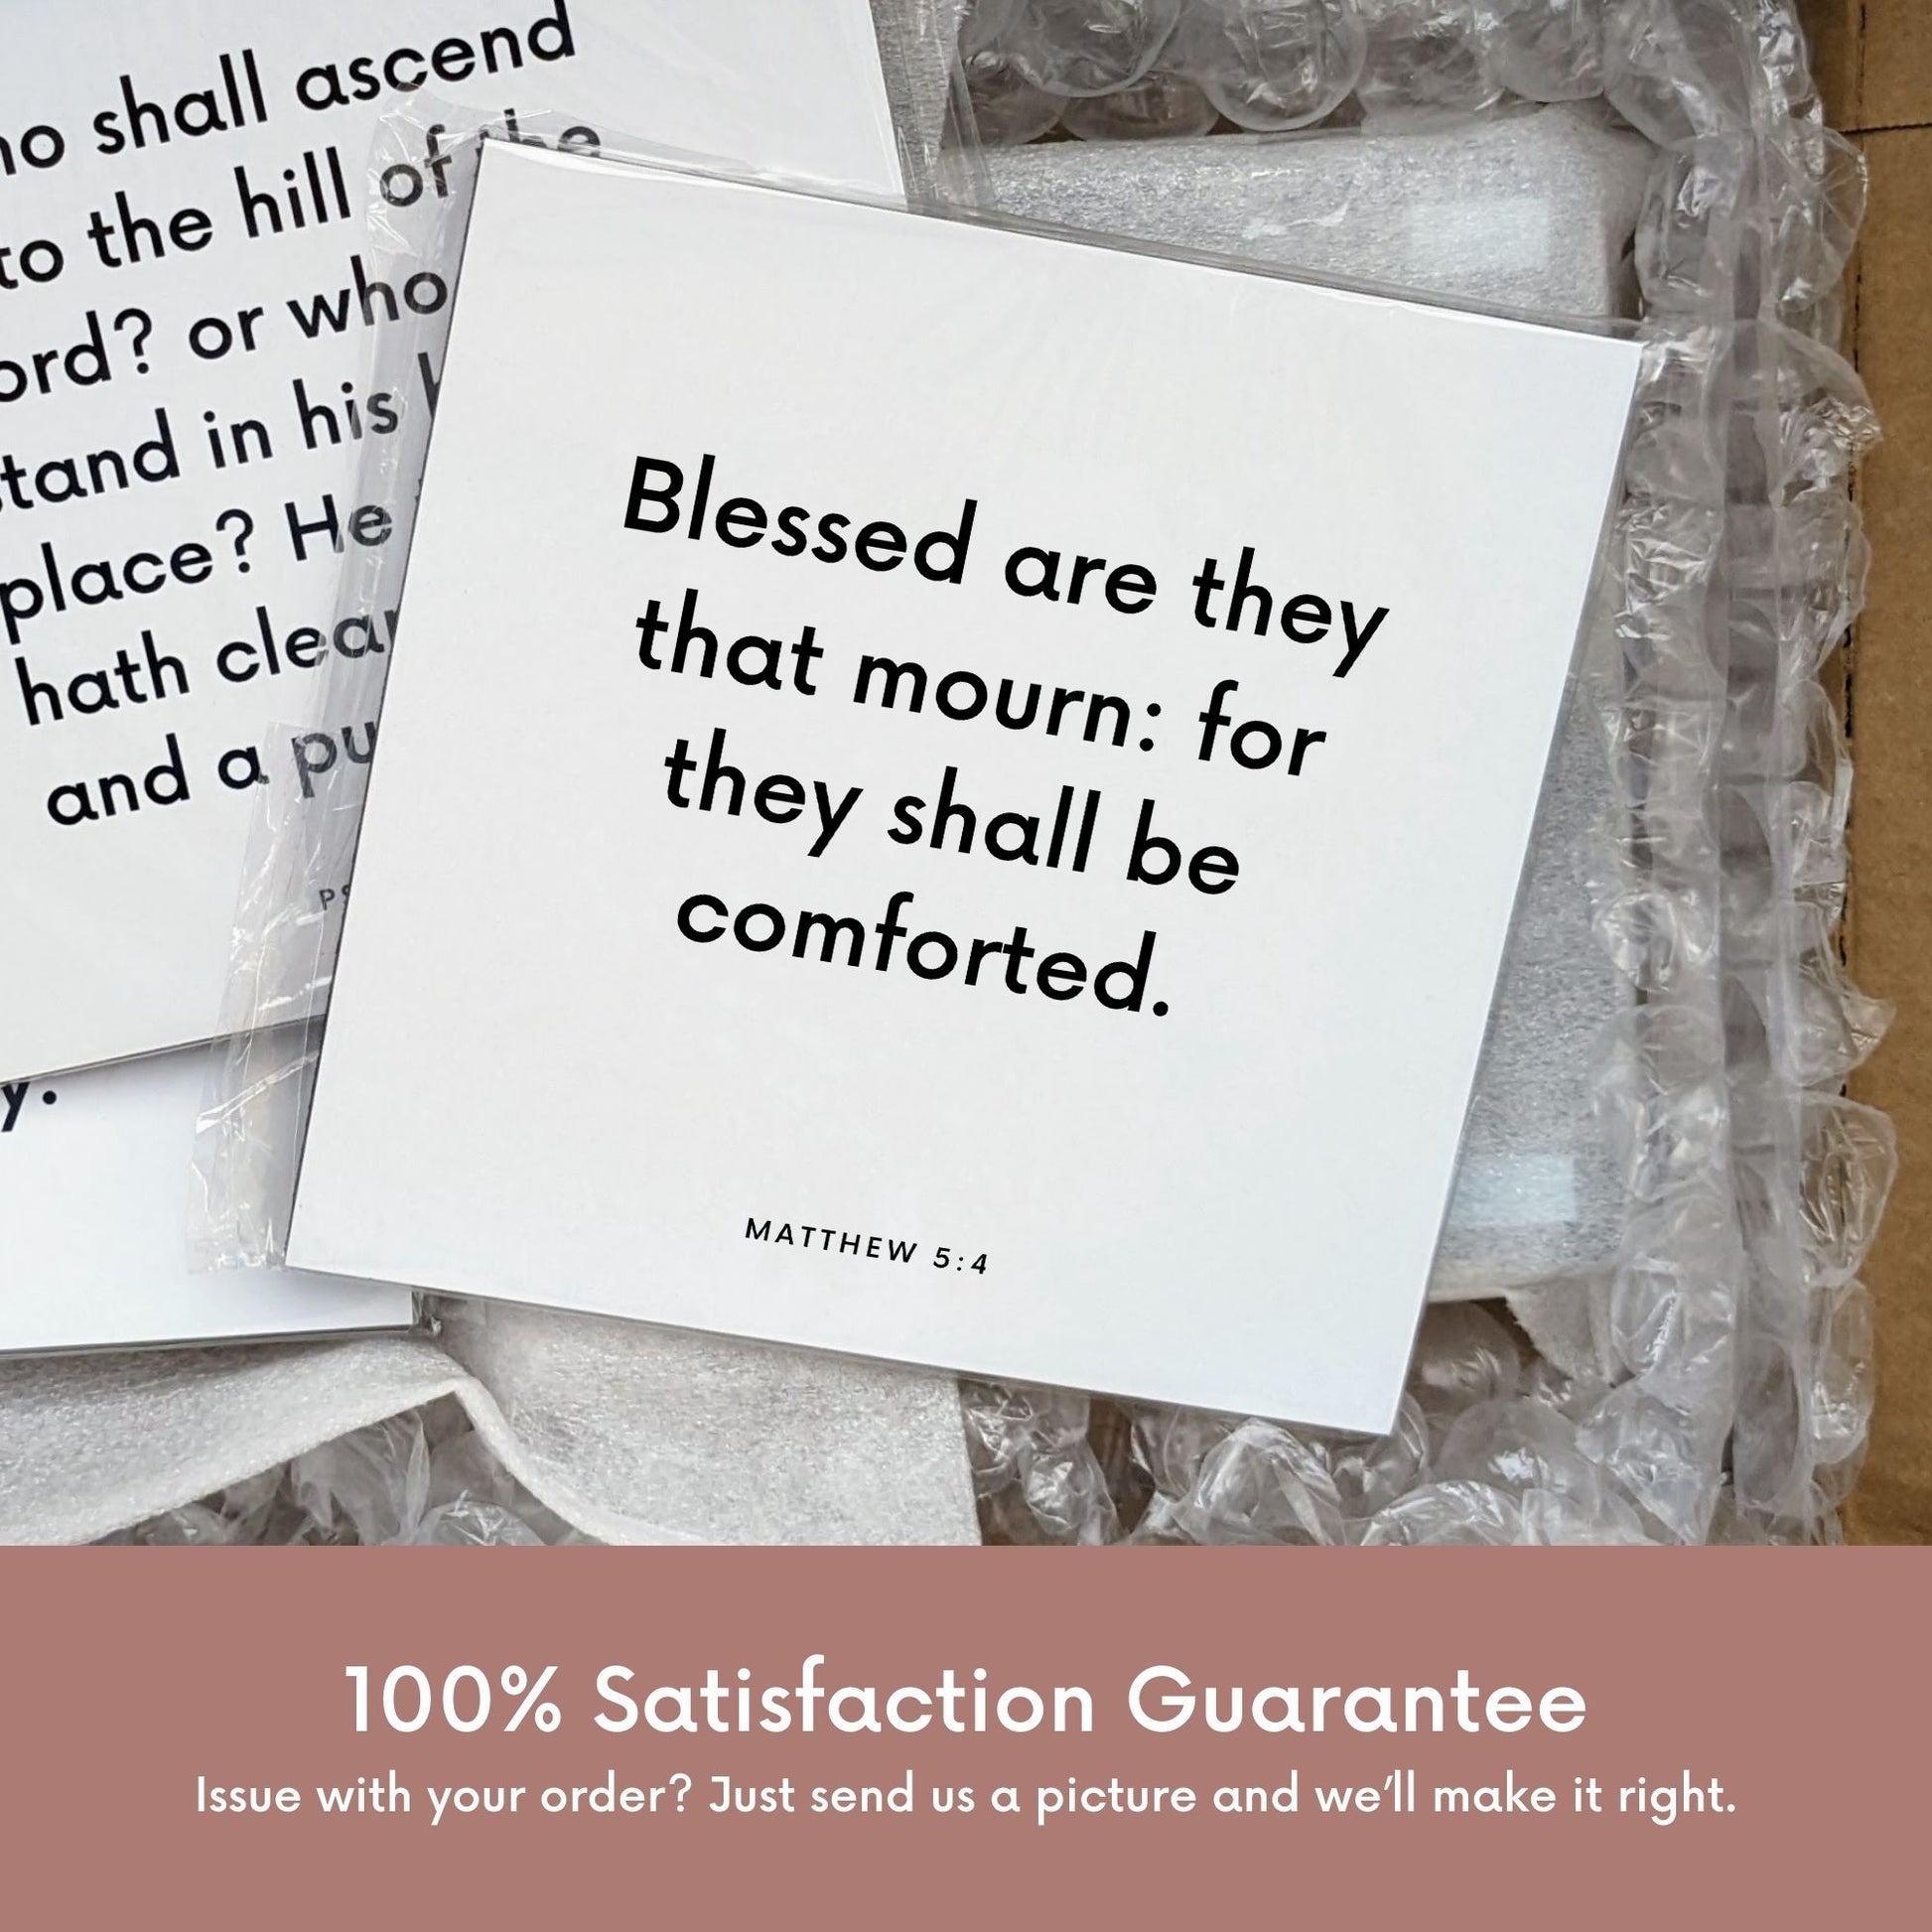 Shipping materials for scripture tile of Matthew 5:4 - "Blessed are they that mourn: for they shall be comforted"